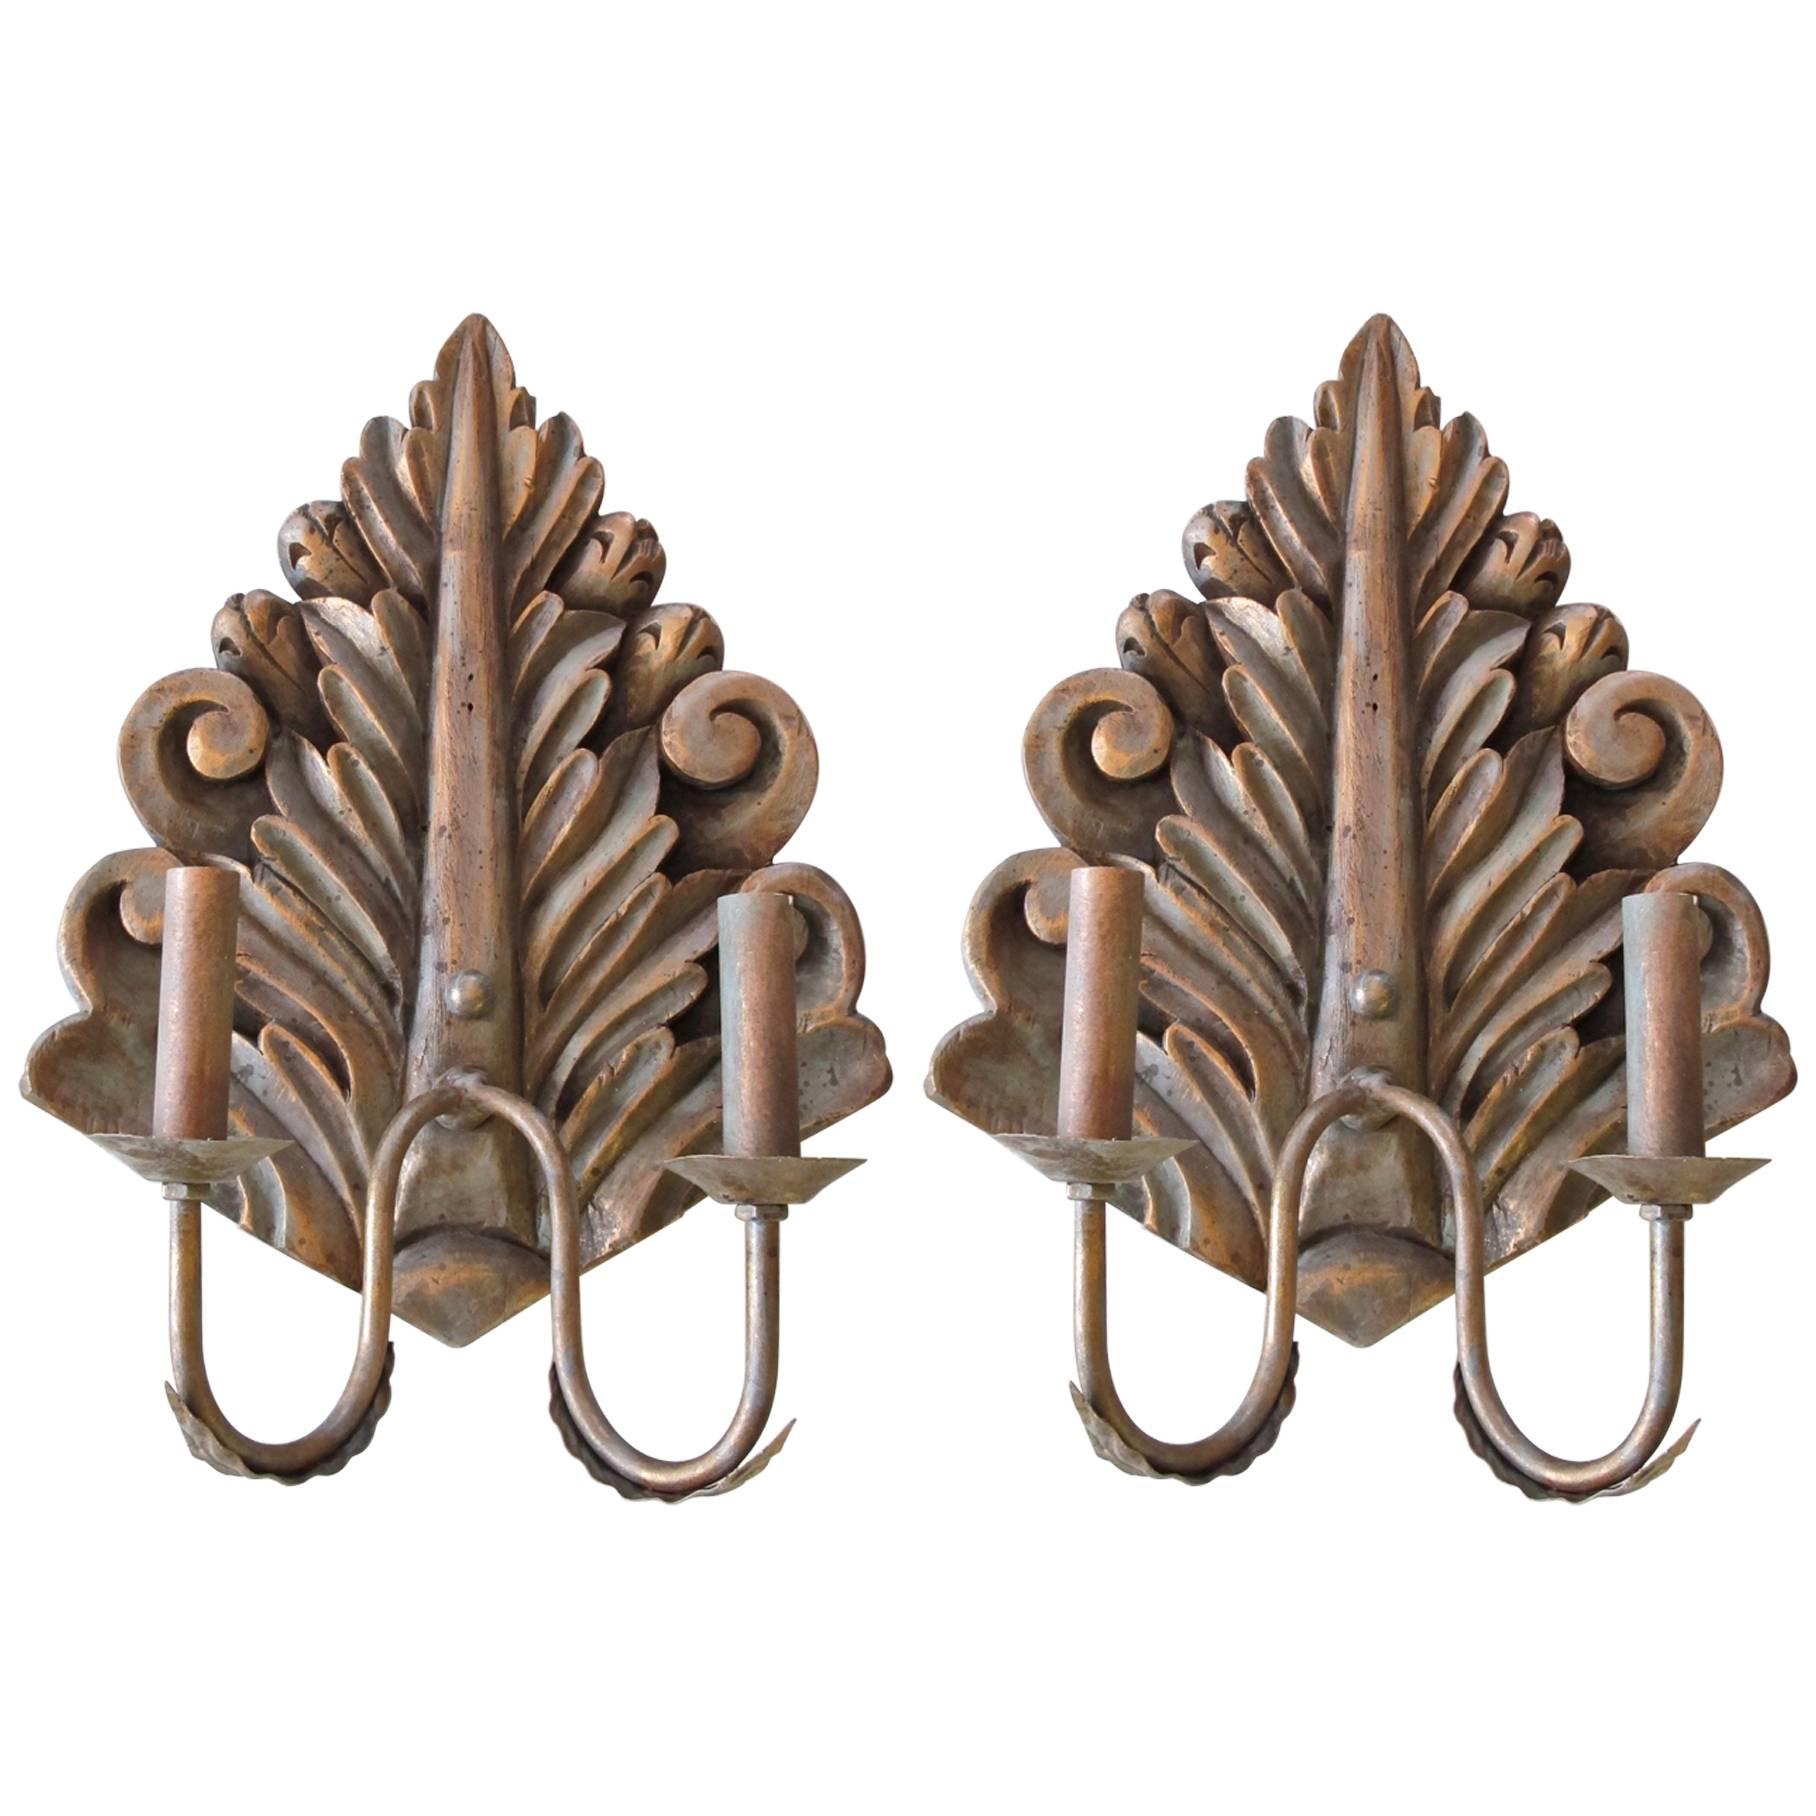 ON SALE! Pair of Hand-Carved Wood Sconces